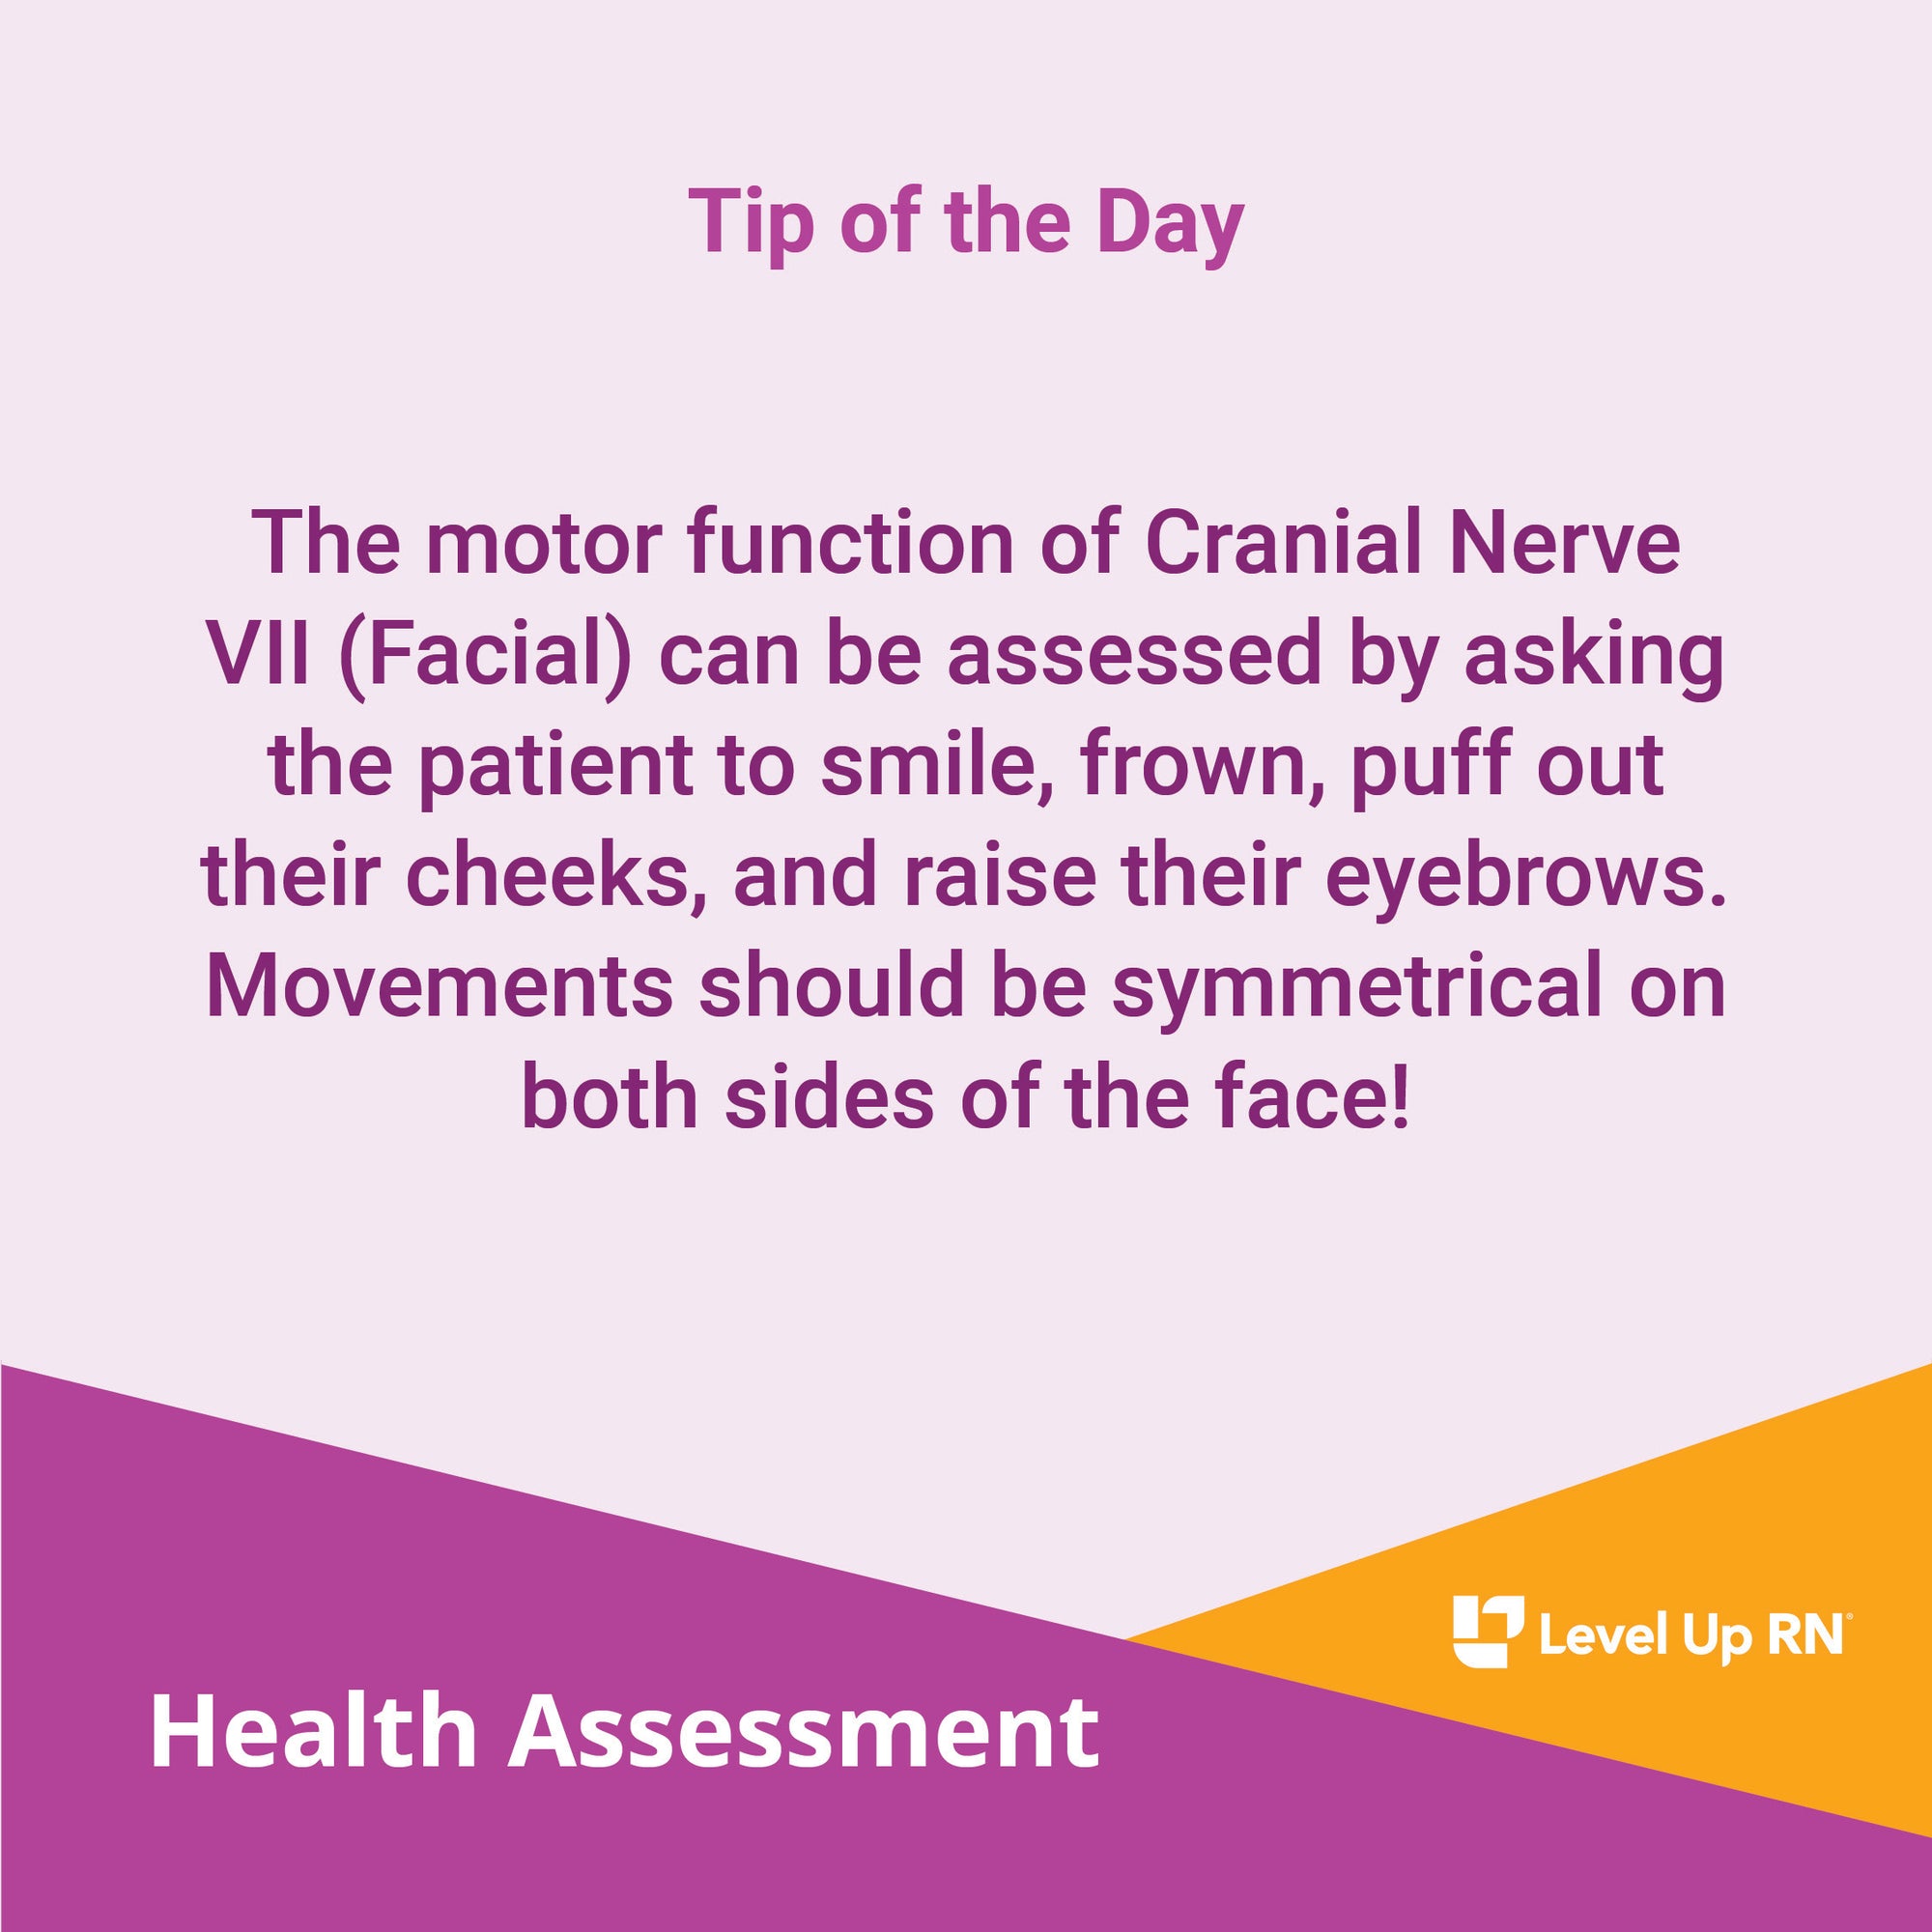 The motor function of Cranial Nerve VII (Facial) can be assessed by asking the patient to smile, frown, puff out their cheeks, and raise their eyebrows.